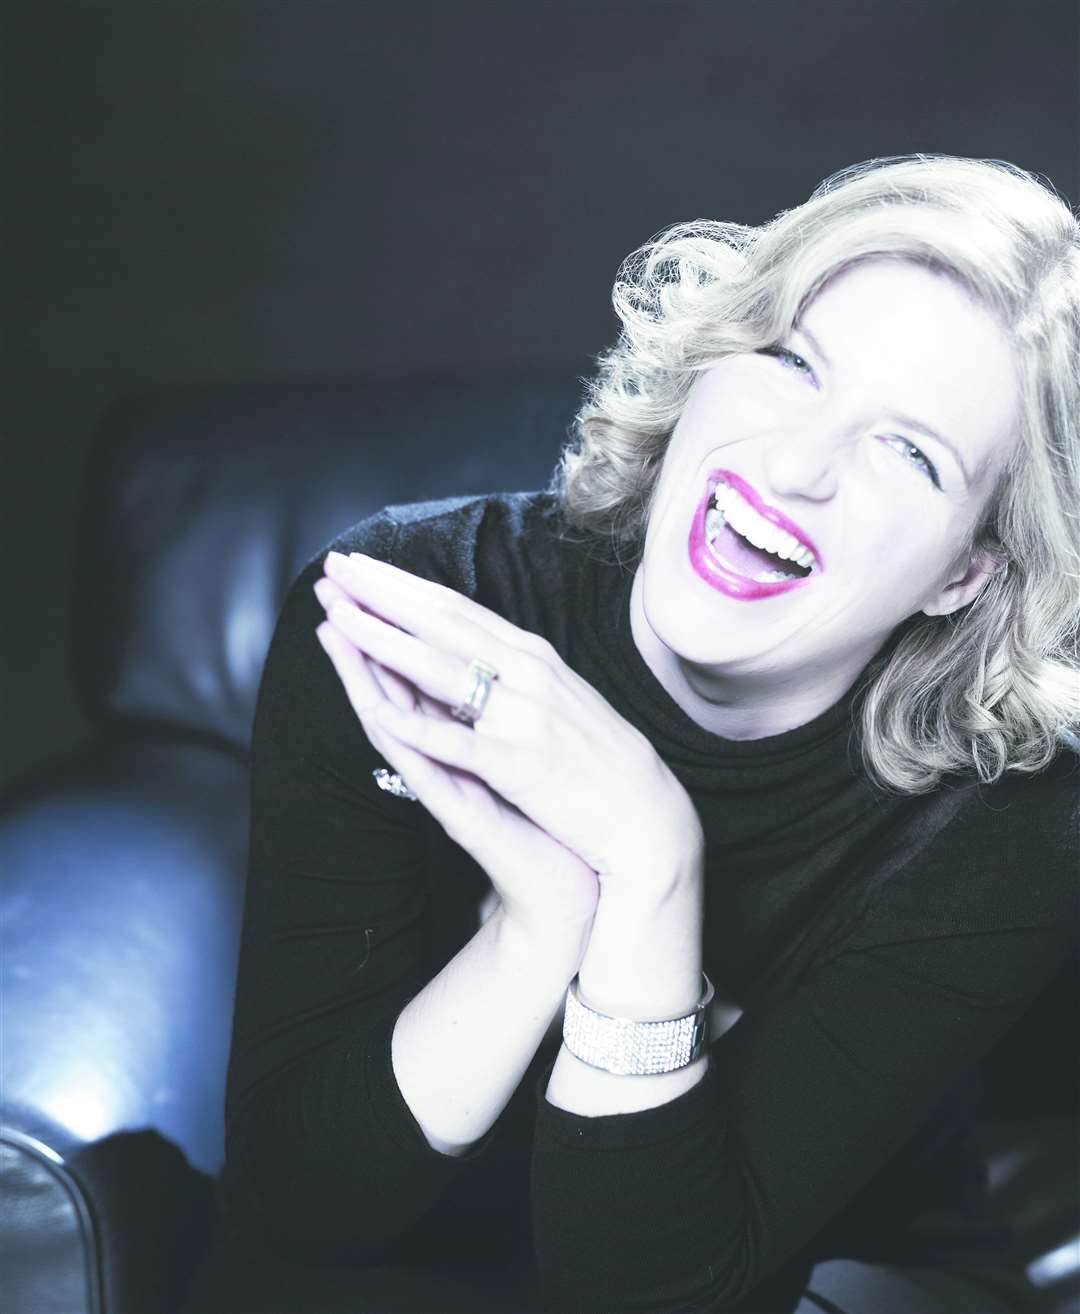 Clare Teal will play